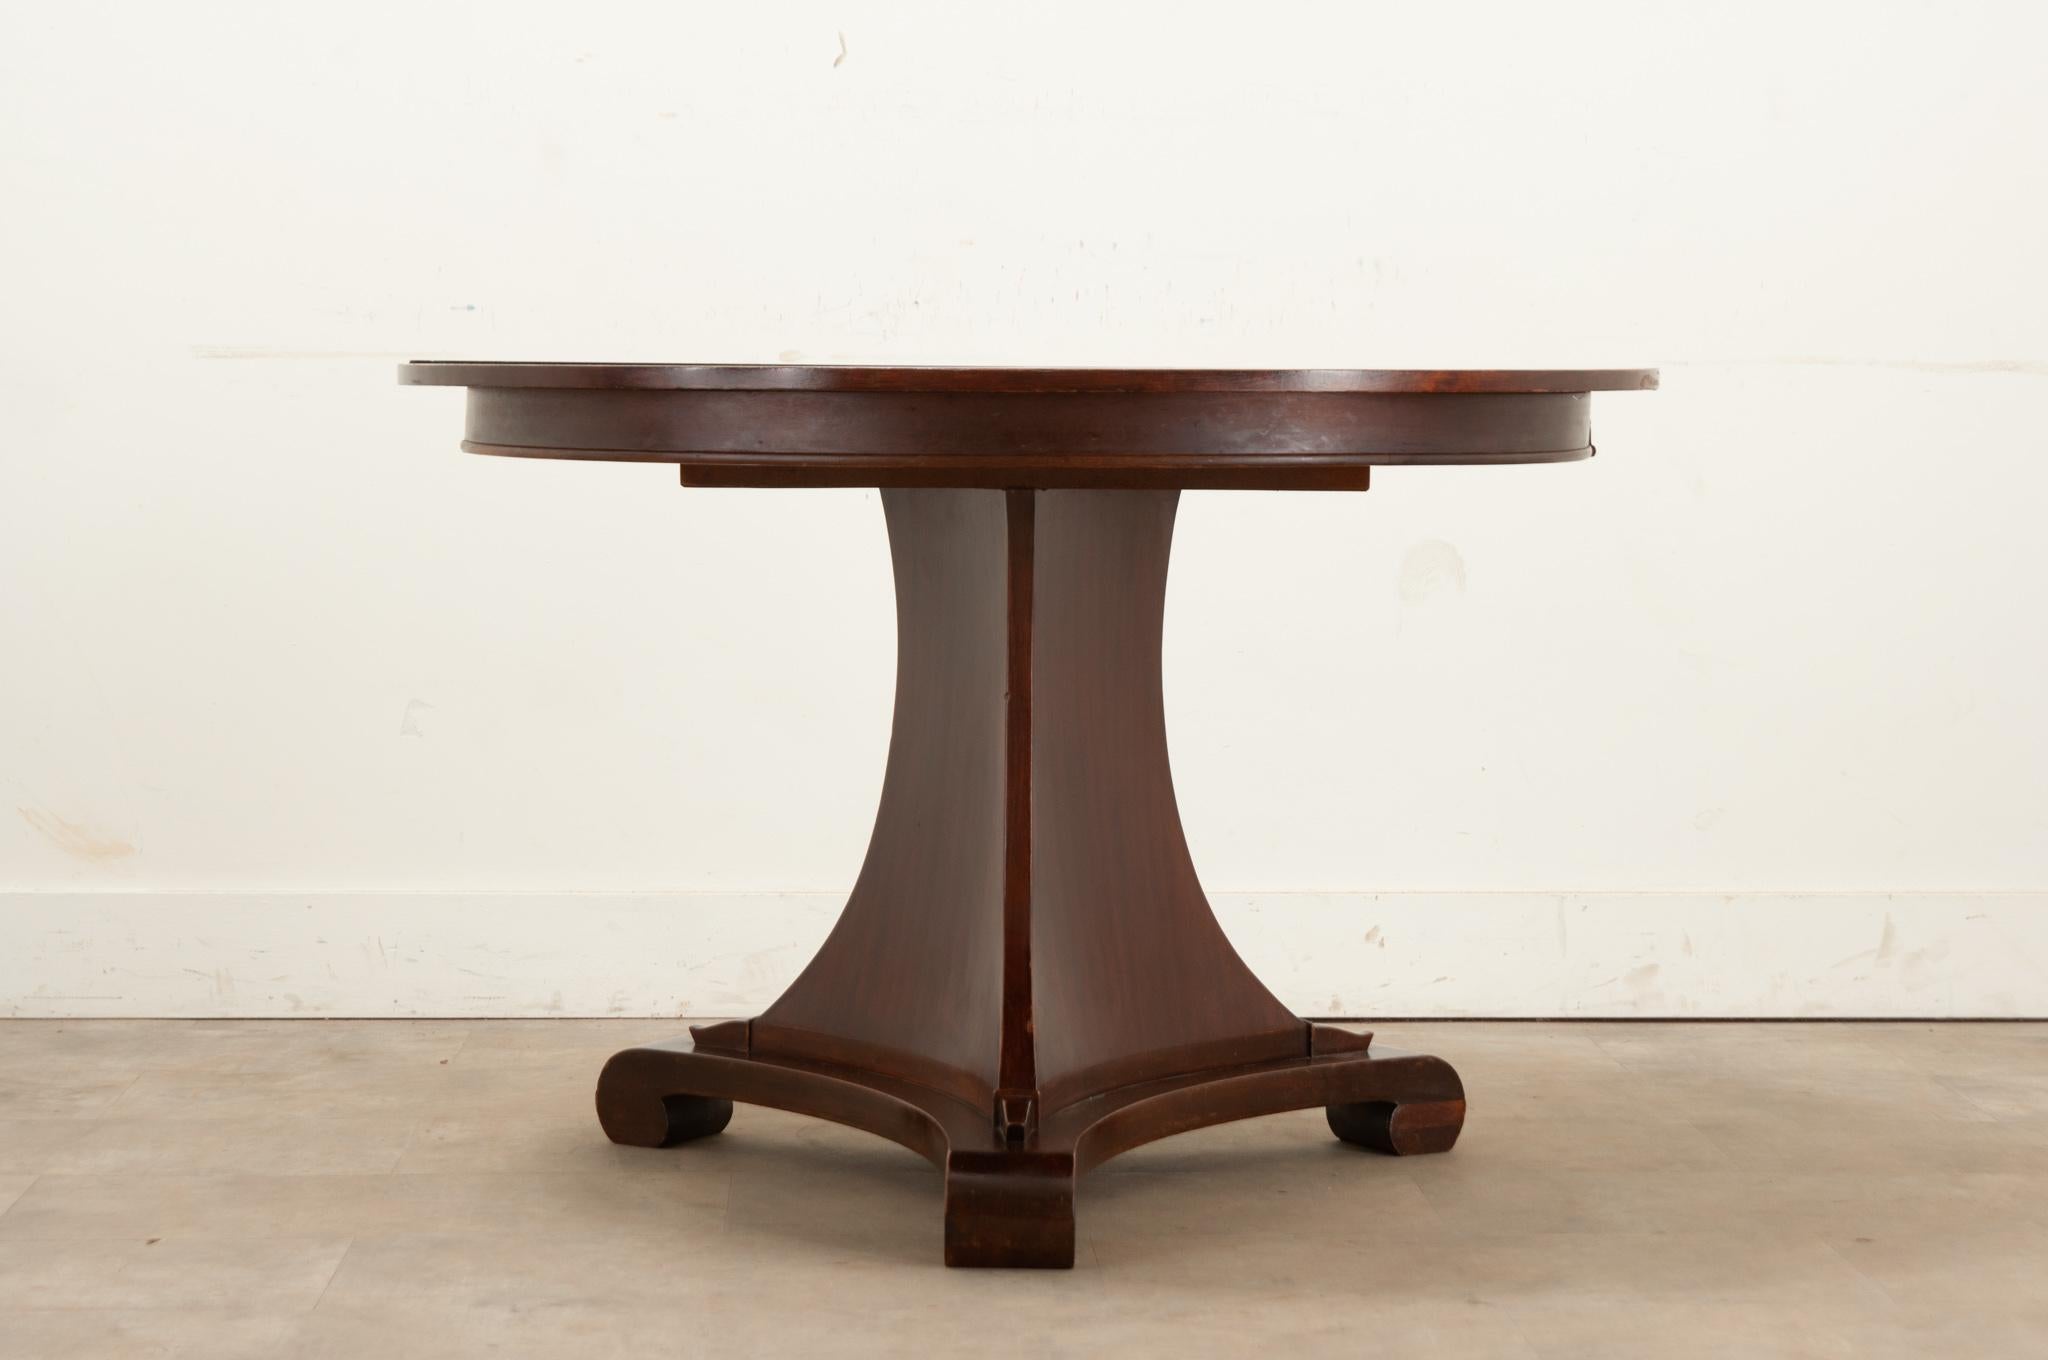 A vintage extending table made from mahogany made in France. This table has a simple top that rests above a pedestal base on scroll feet. The tabletop opens to accommodate one leaf in the middle, adding 15 ¾”W. Cleaned and polished with a French